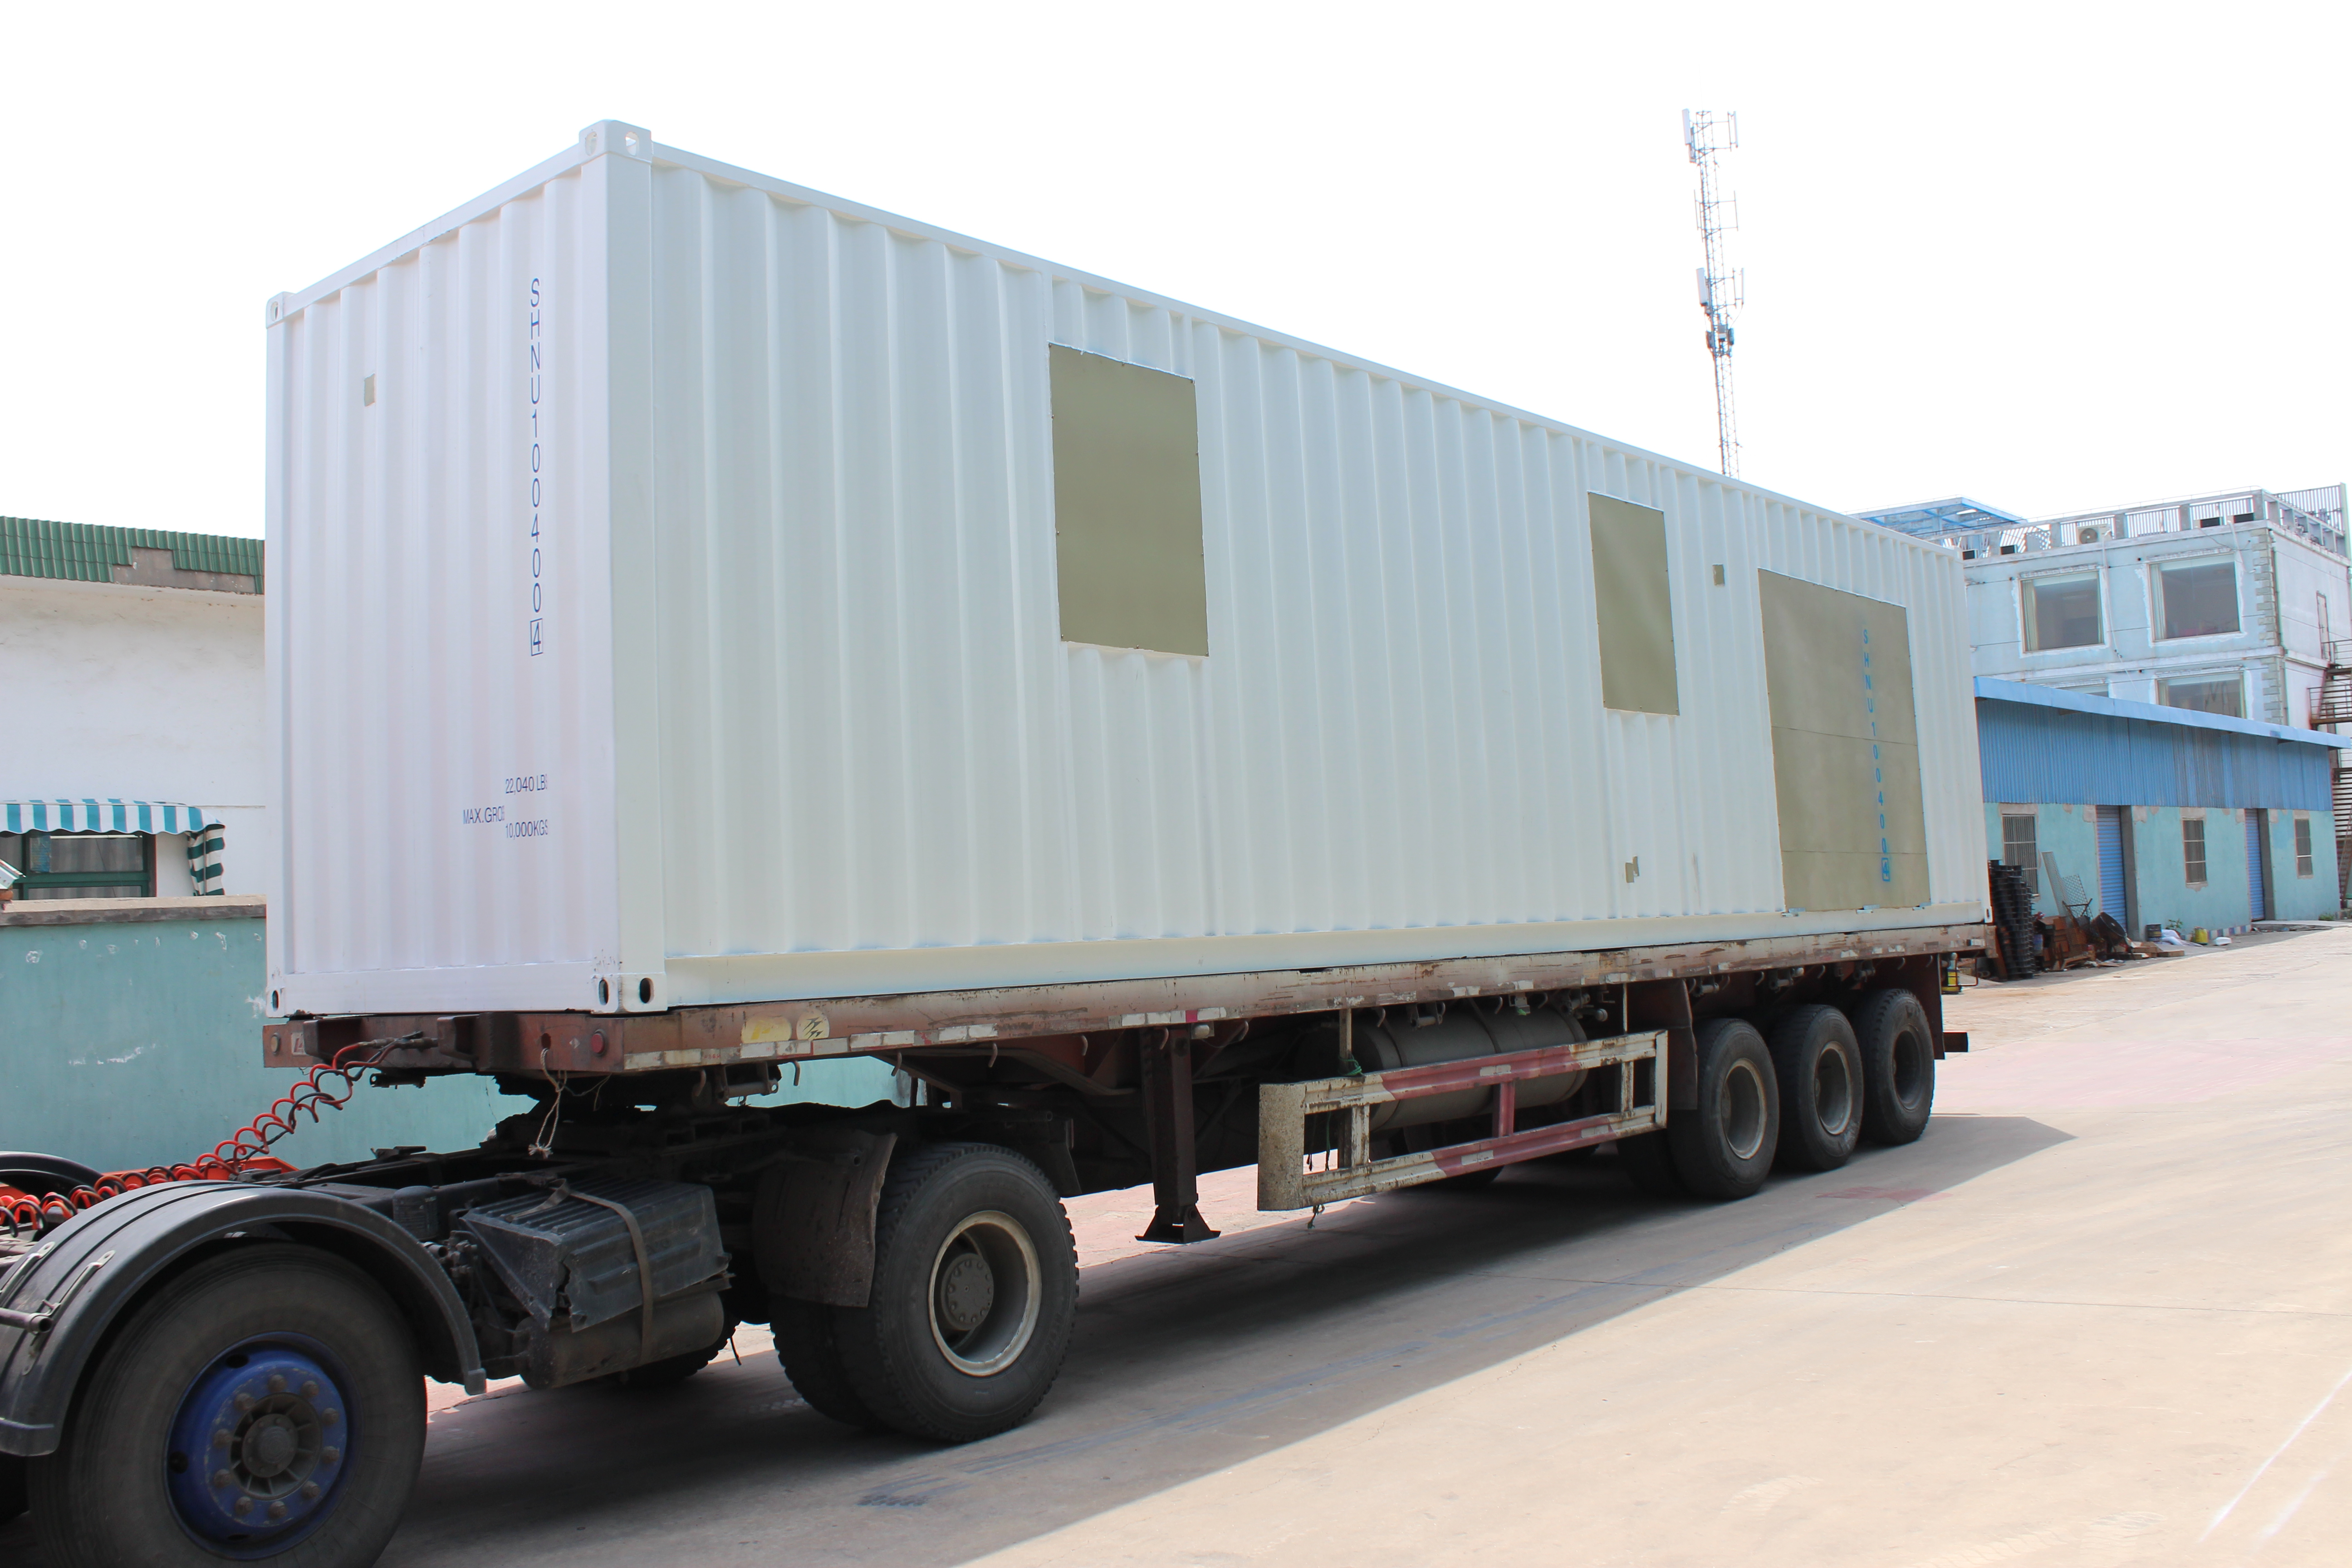 buy container home china, buy container homes from china, buy shipping container home from china, china container home cost, china container home northern ireland supplier